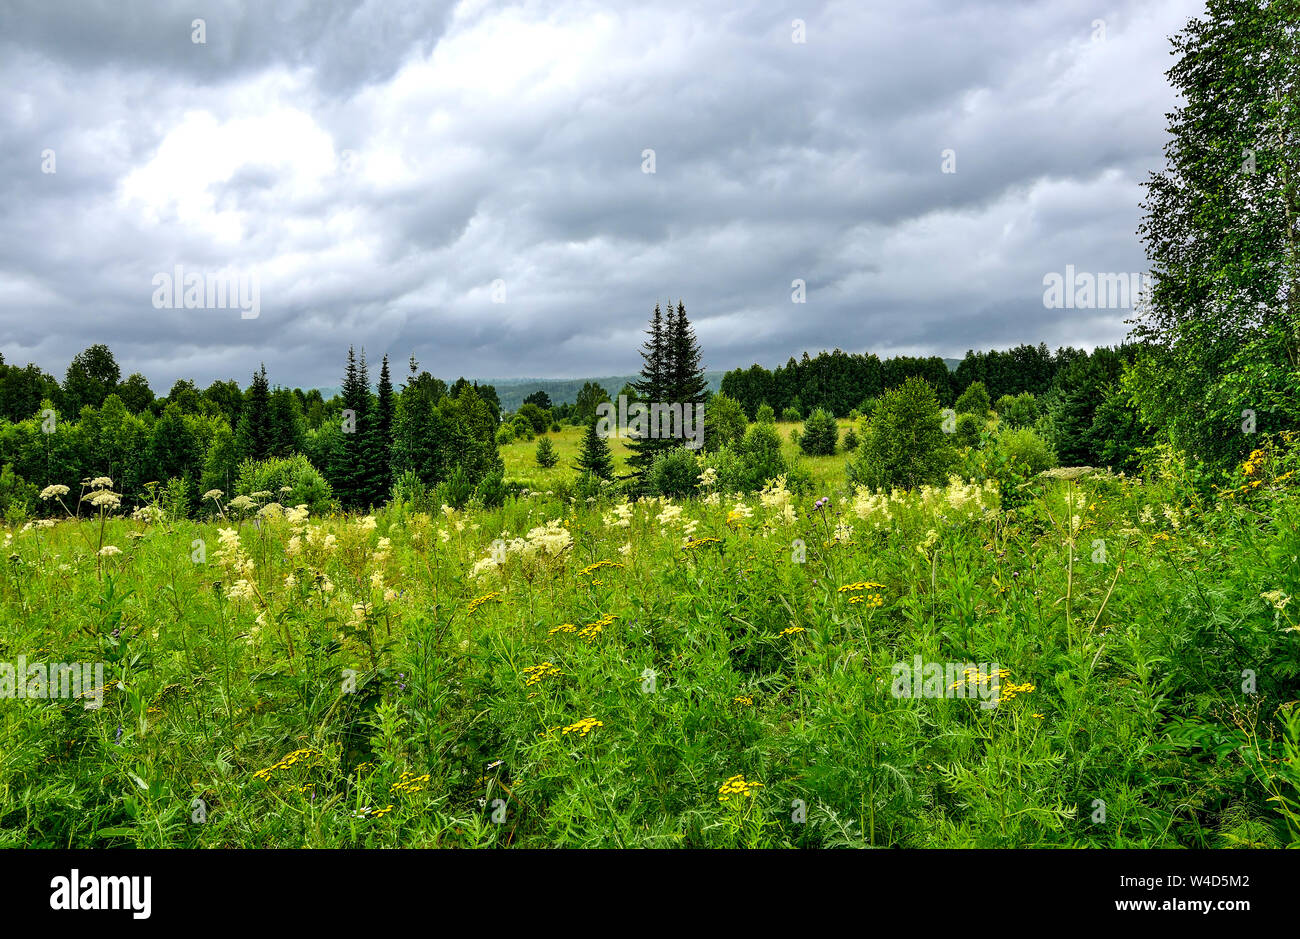 Dramatic cloudy sky over flowering meadow and coniferous forest - beautiful summer landscape at rainy weather, overcast sky. Grey heavy clouds over bl Stock Photo